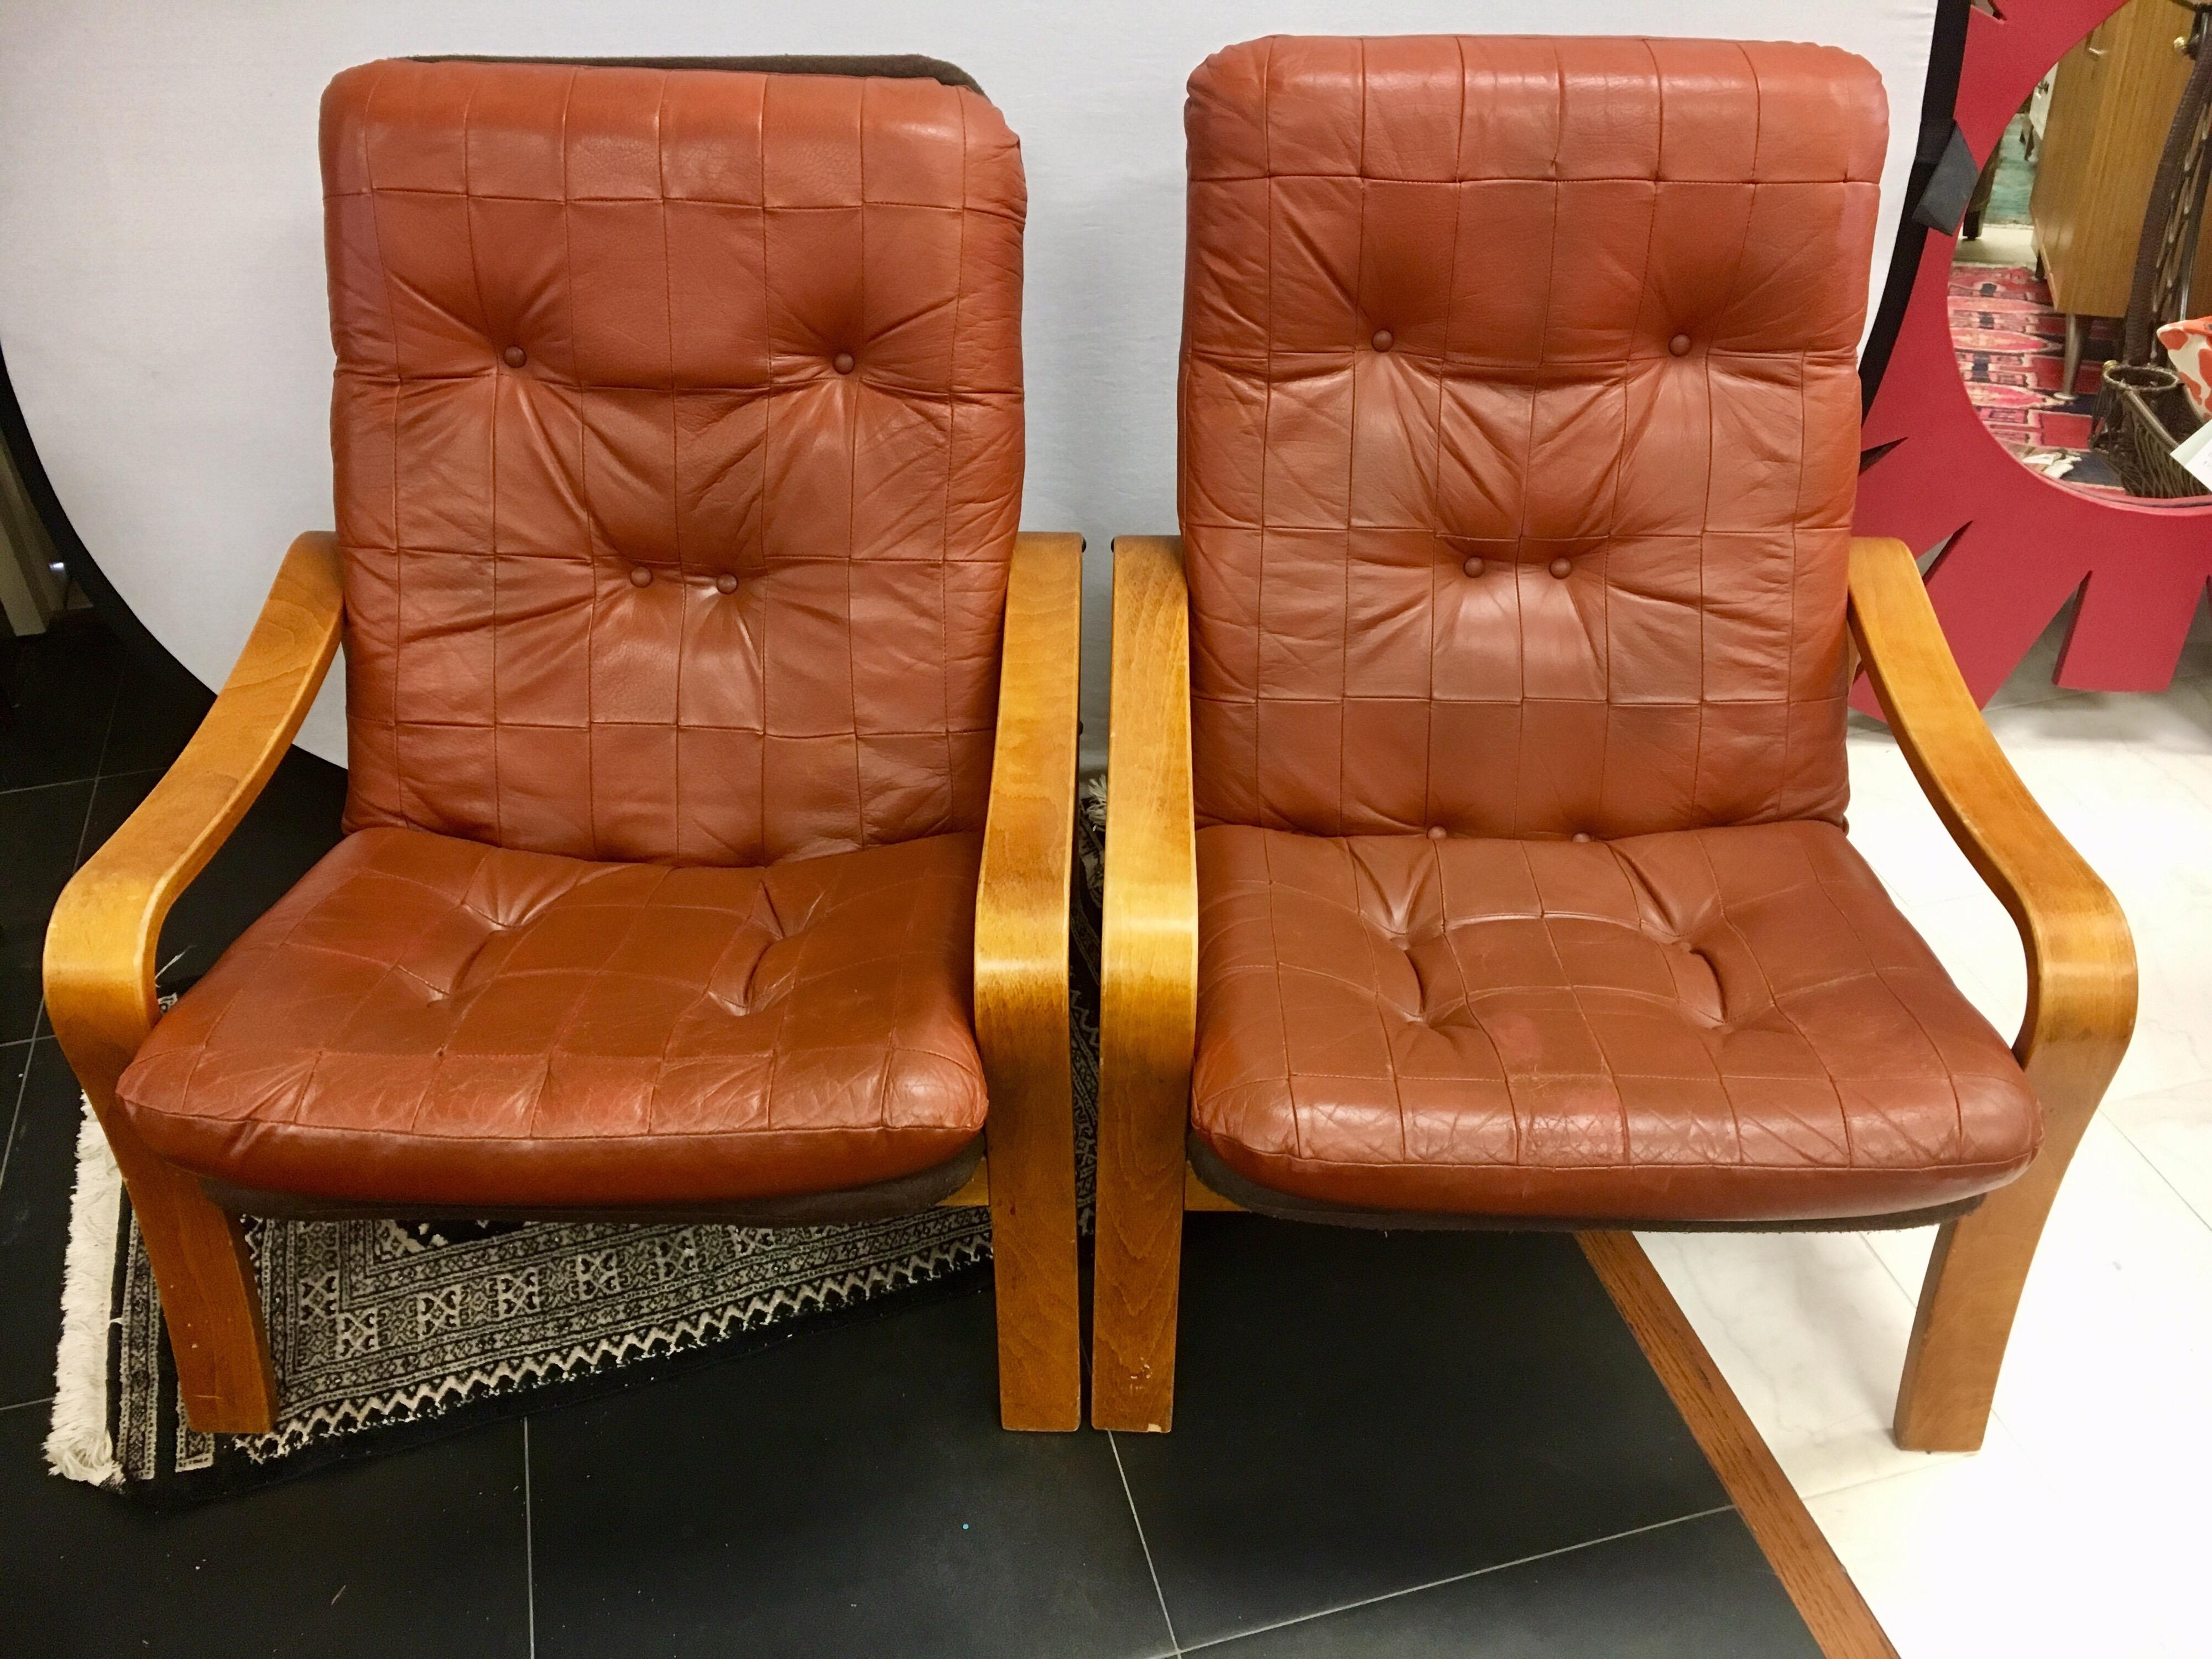 Danish modern teak lounge chairs with quilted and tufted leather back and seat cushion. Back and seat cushion is one piece, not attached.